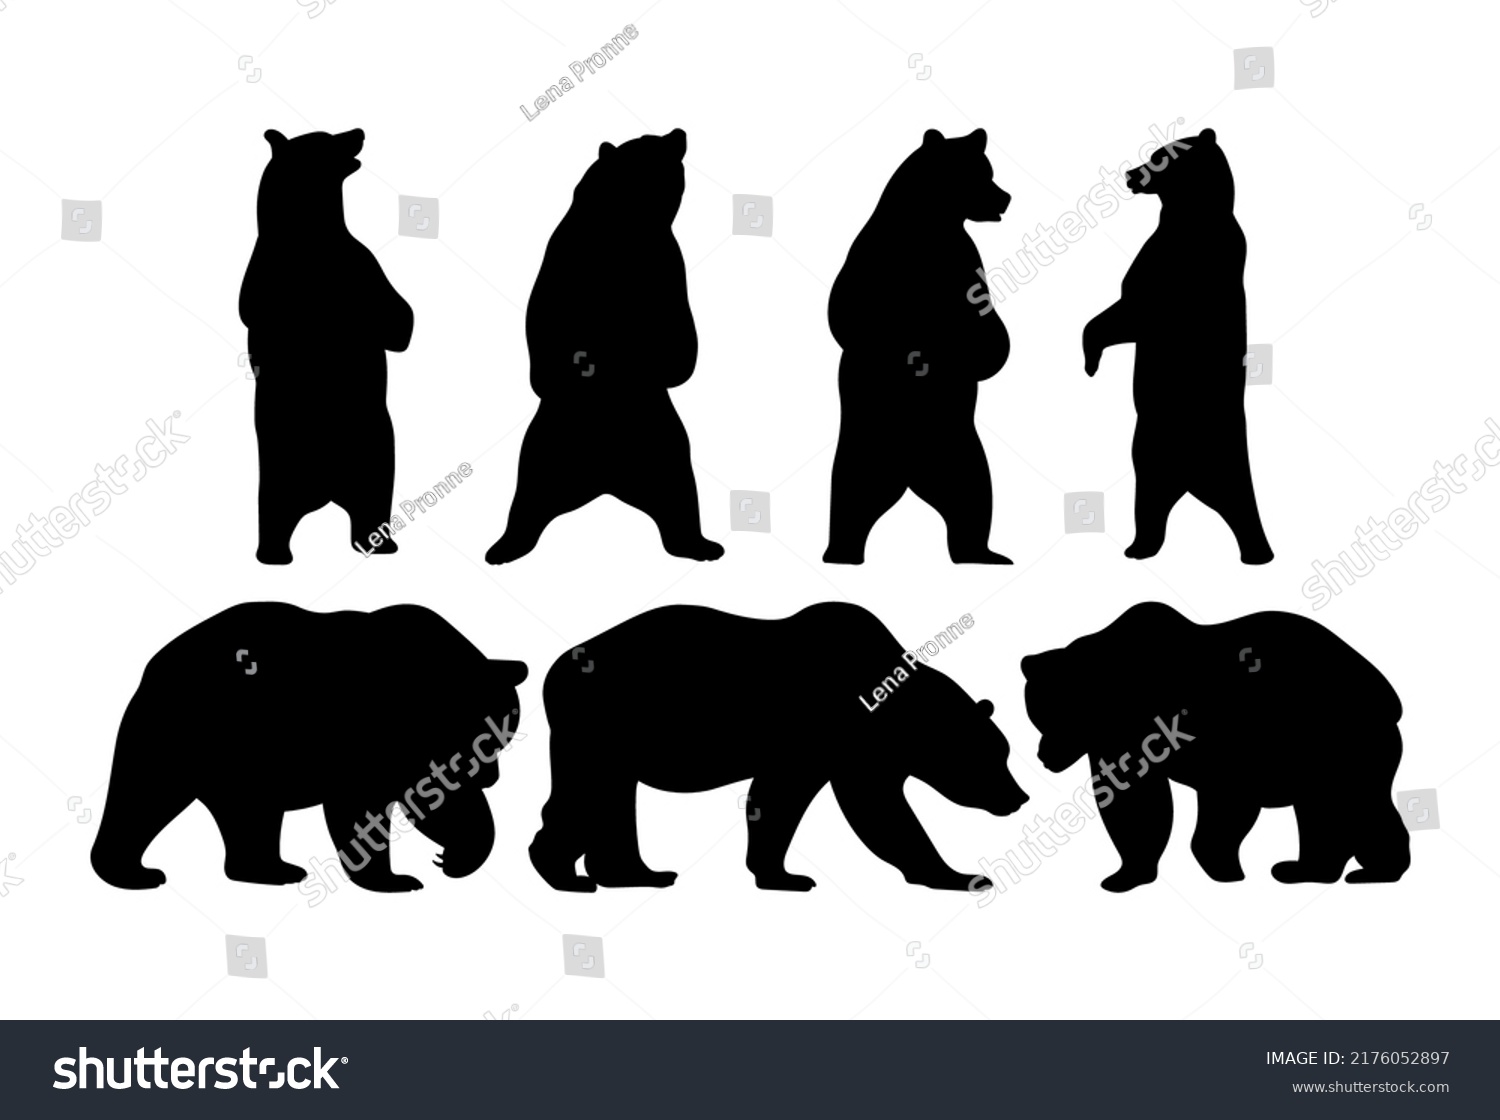 SVG of Bears. Black and white illustrations isolated svg